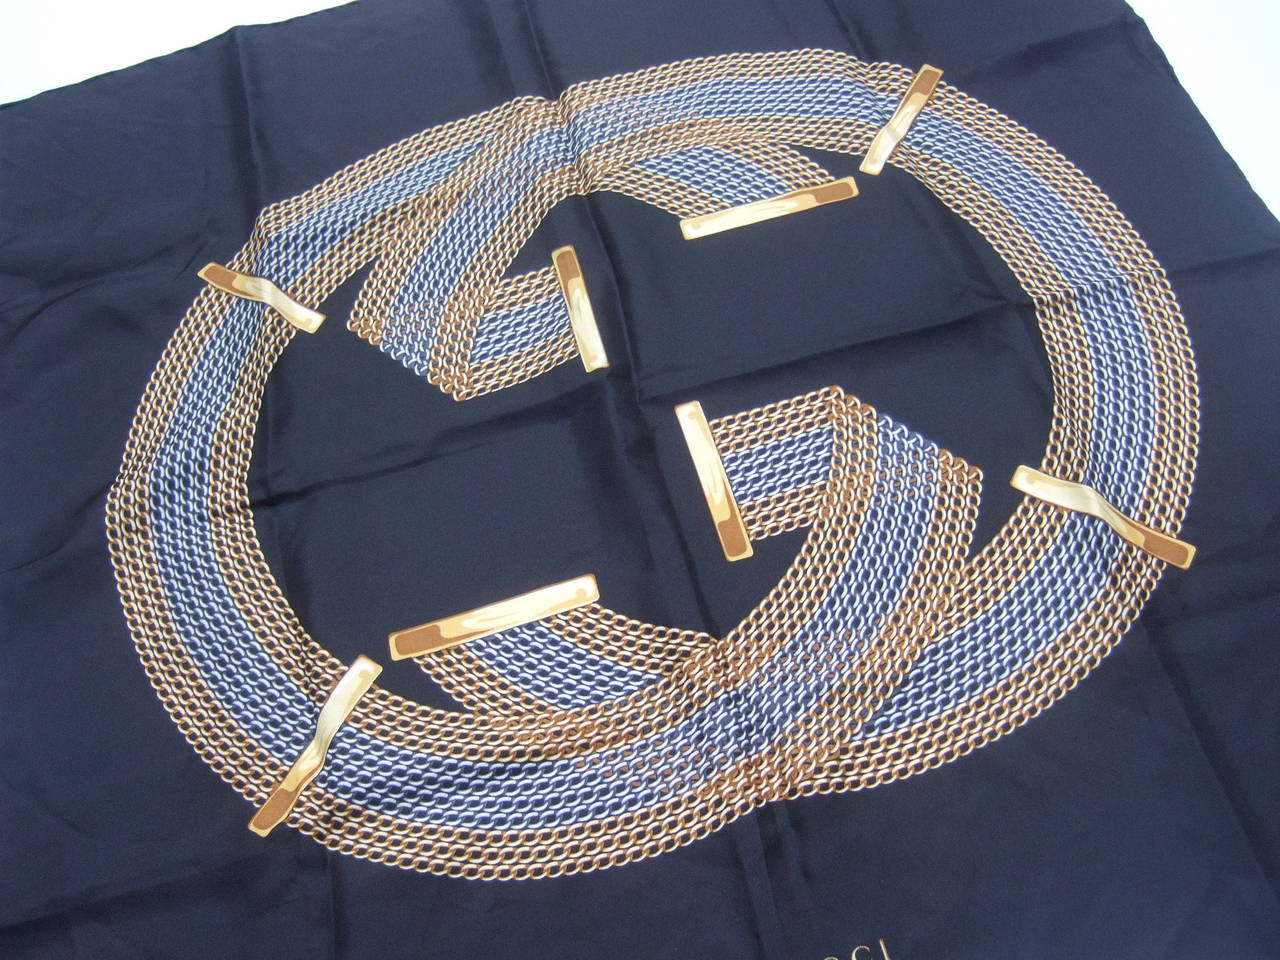 Gucci Italy Luxurious black silk logo scarf
The Italian hand rolled scarf is designed with Gucci's interlocked initials 
The G.G. initials are illustrated with rows of gold & silver chains

The stylish scarf makes a chic accessory

Designed by